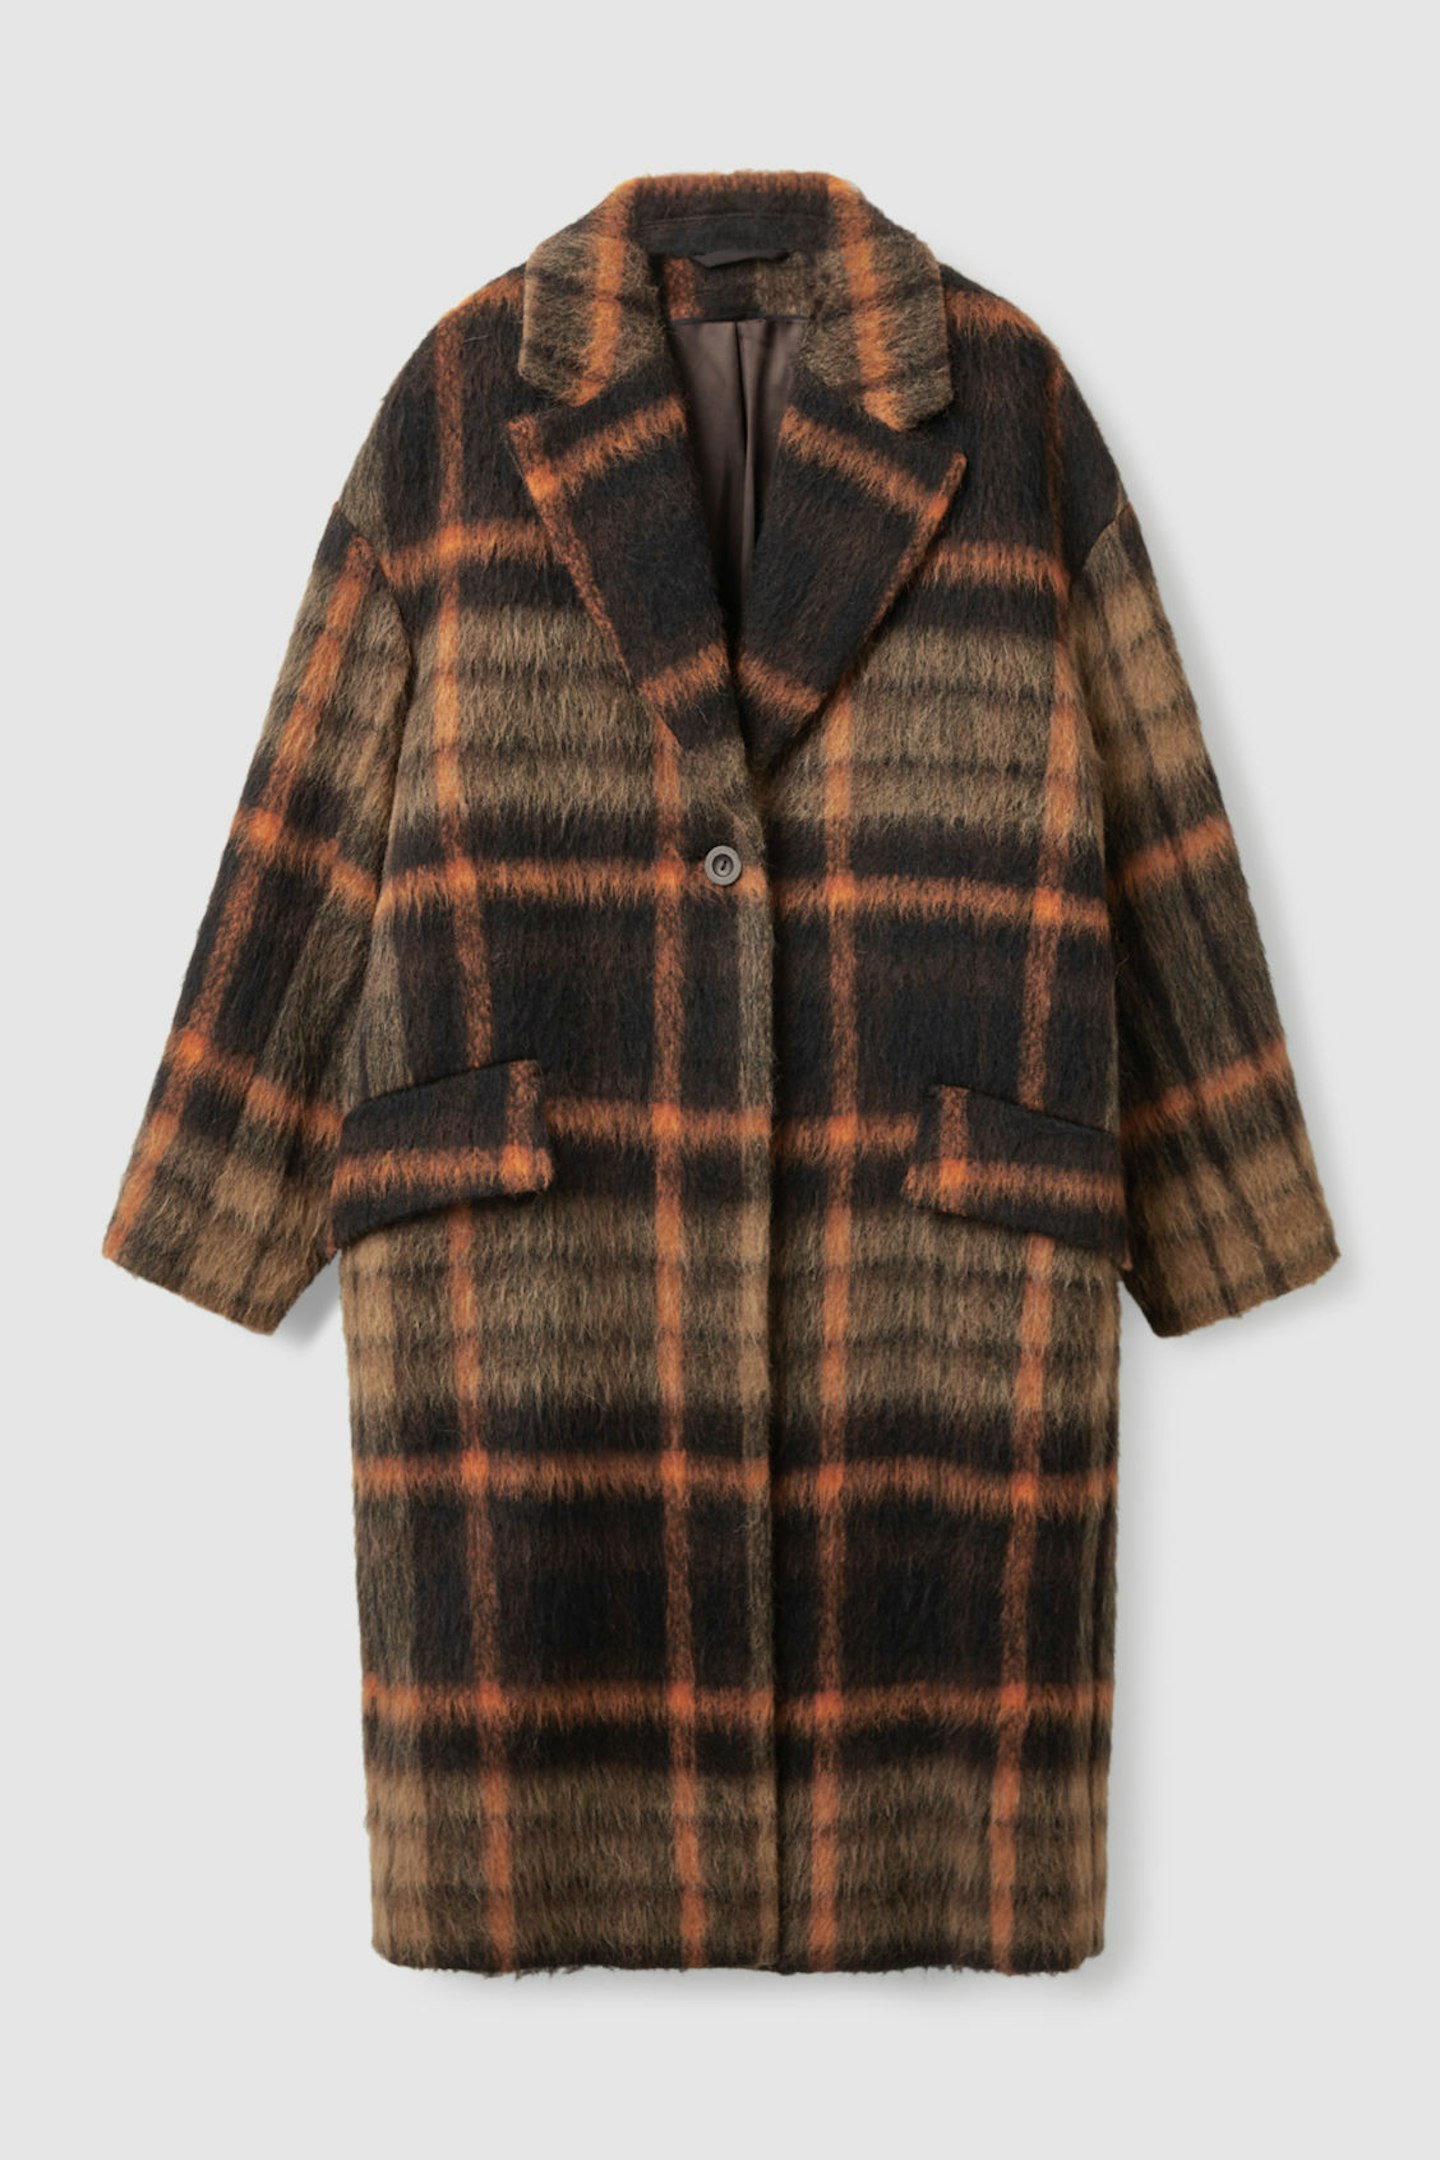 COS, Tailored Checked Coat, £225